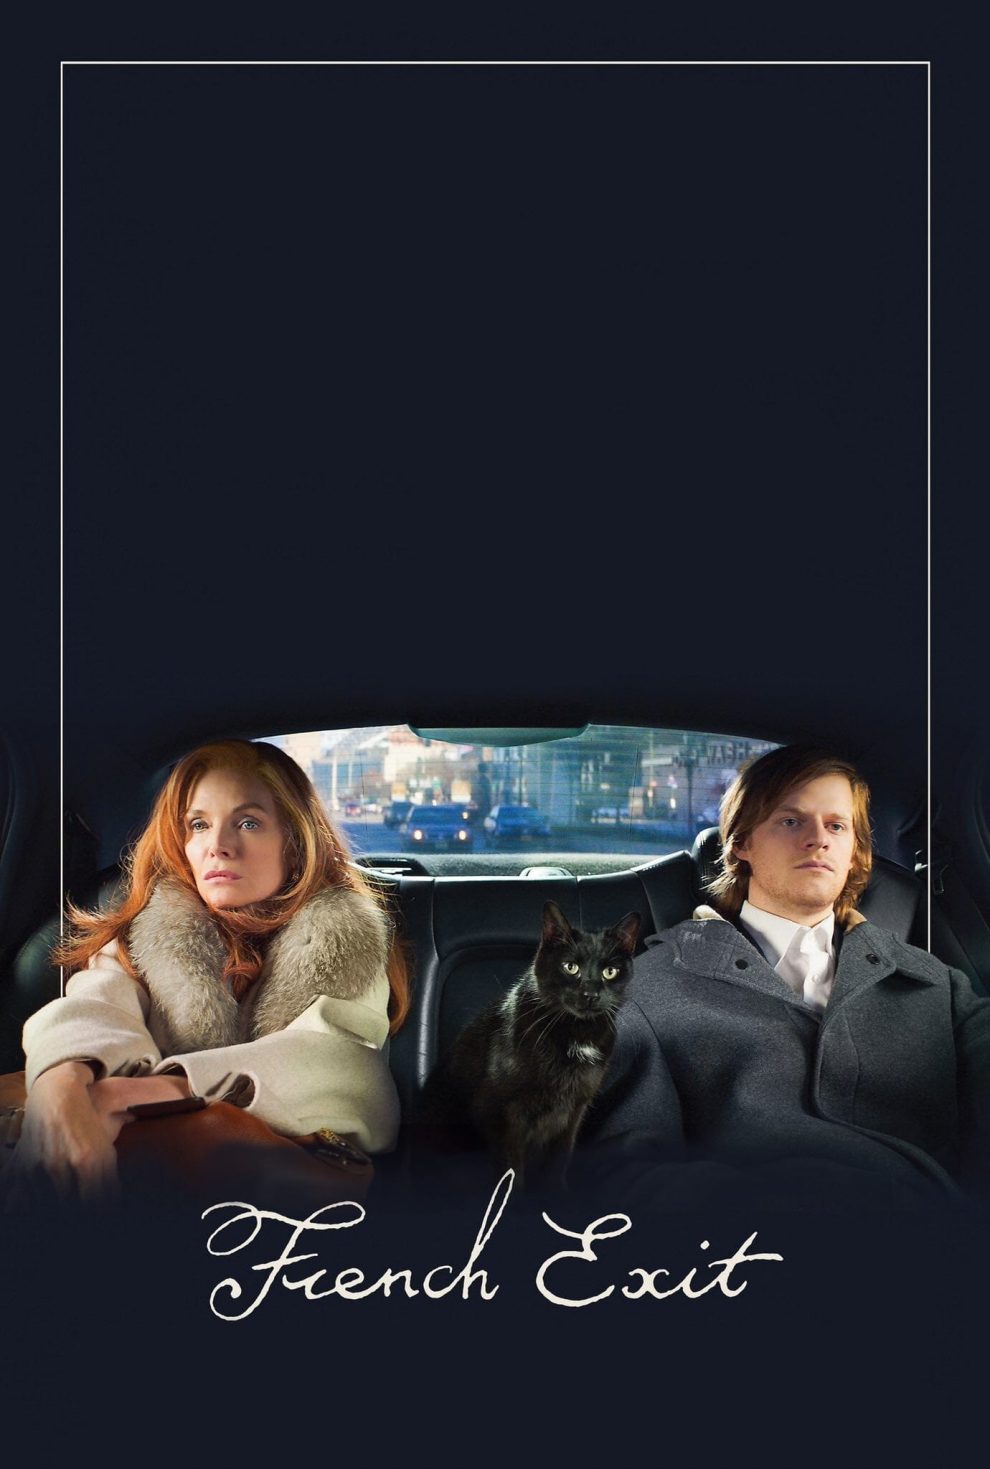 Poster for the movie "French Exit"